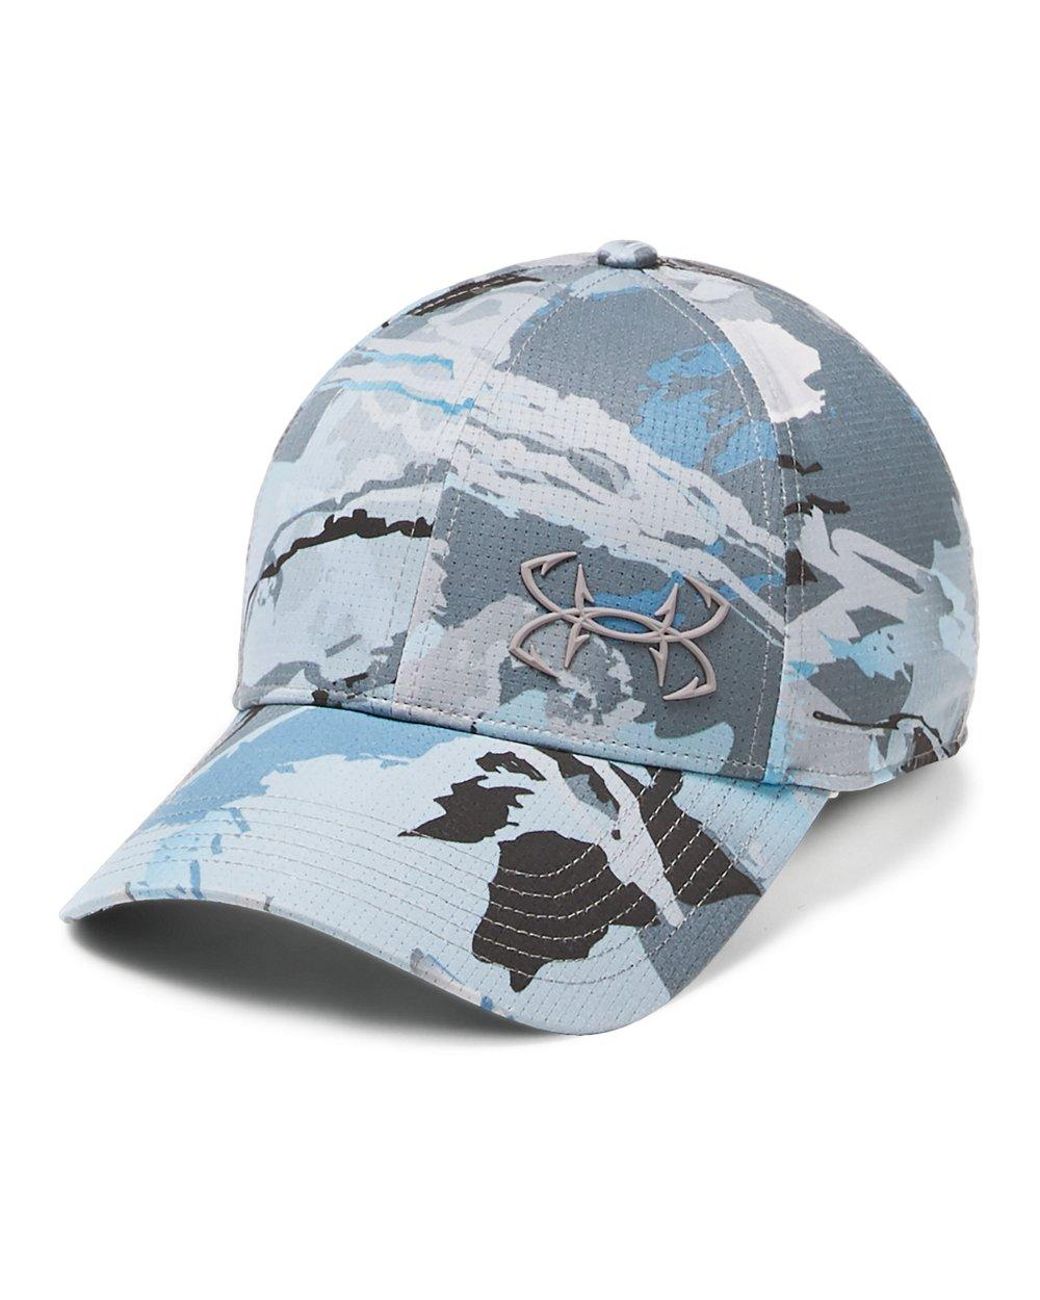 Under Armour Outerwear S Thermocline Cap 2.0, Usa Hydro Camo//pitch Gray,  Large/x-large in Blue for Men